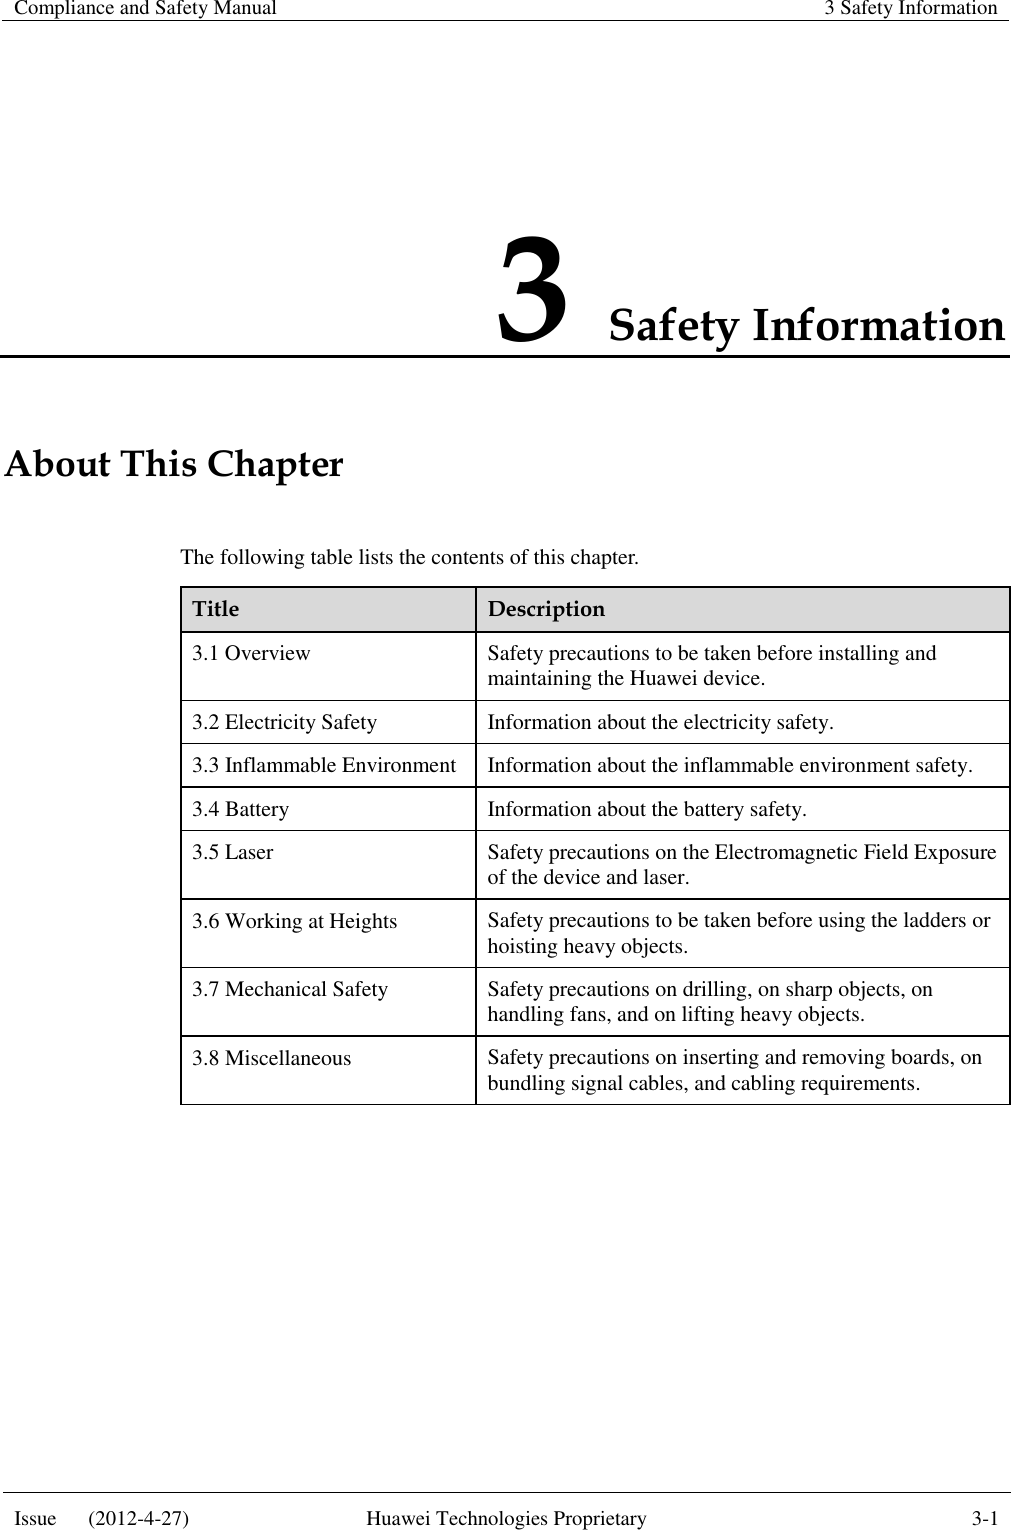 Compliance and Safety Manual 3 Safety Information  Issue      (2012-4-27) Huawei Technologies Proprietary 3-1  3 Safety Information About This Chapter The following table lists the contents of this chapter. Title Description 3.1 Overview Safety precautions to be taken before installing and maintaining the Huawei device. 3.2 Electricity Safety Information about the electricity safety. 3.3 Inflammable Environment Information about the inflammable environment safety. 3.4 Battery Information about the battery safety. 3.5 Laser Safety precautions on the Electromagnetic Field Exposure of the device and laser. 3.6 Working at Heights Safety precautions to be taken before using the ladders or hoisting heavy objects. 3.7 Mechanical Safety Safety precautions on drilling, on sharp objects, on handling fans, and on lifting heavy objects. 3.8 Miscellaneous Safety precautions on inserting and removing boards, on bundling signal cables, and cabling requirements.  